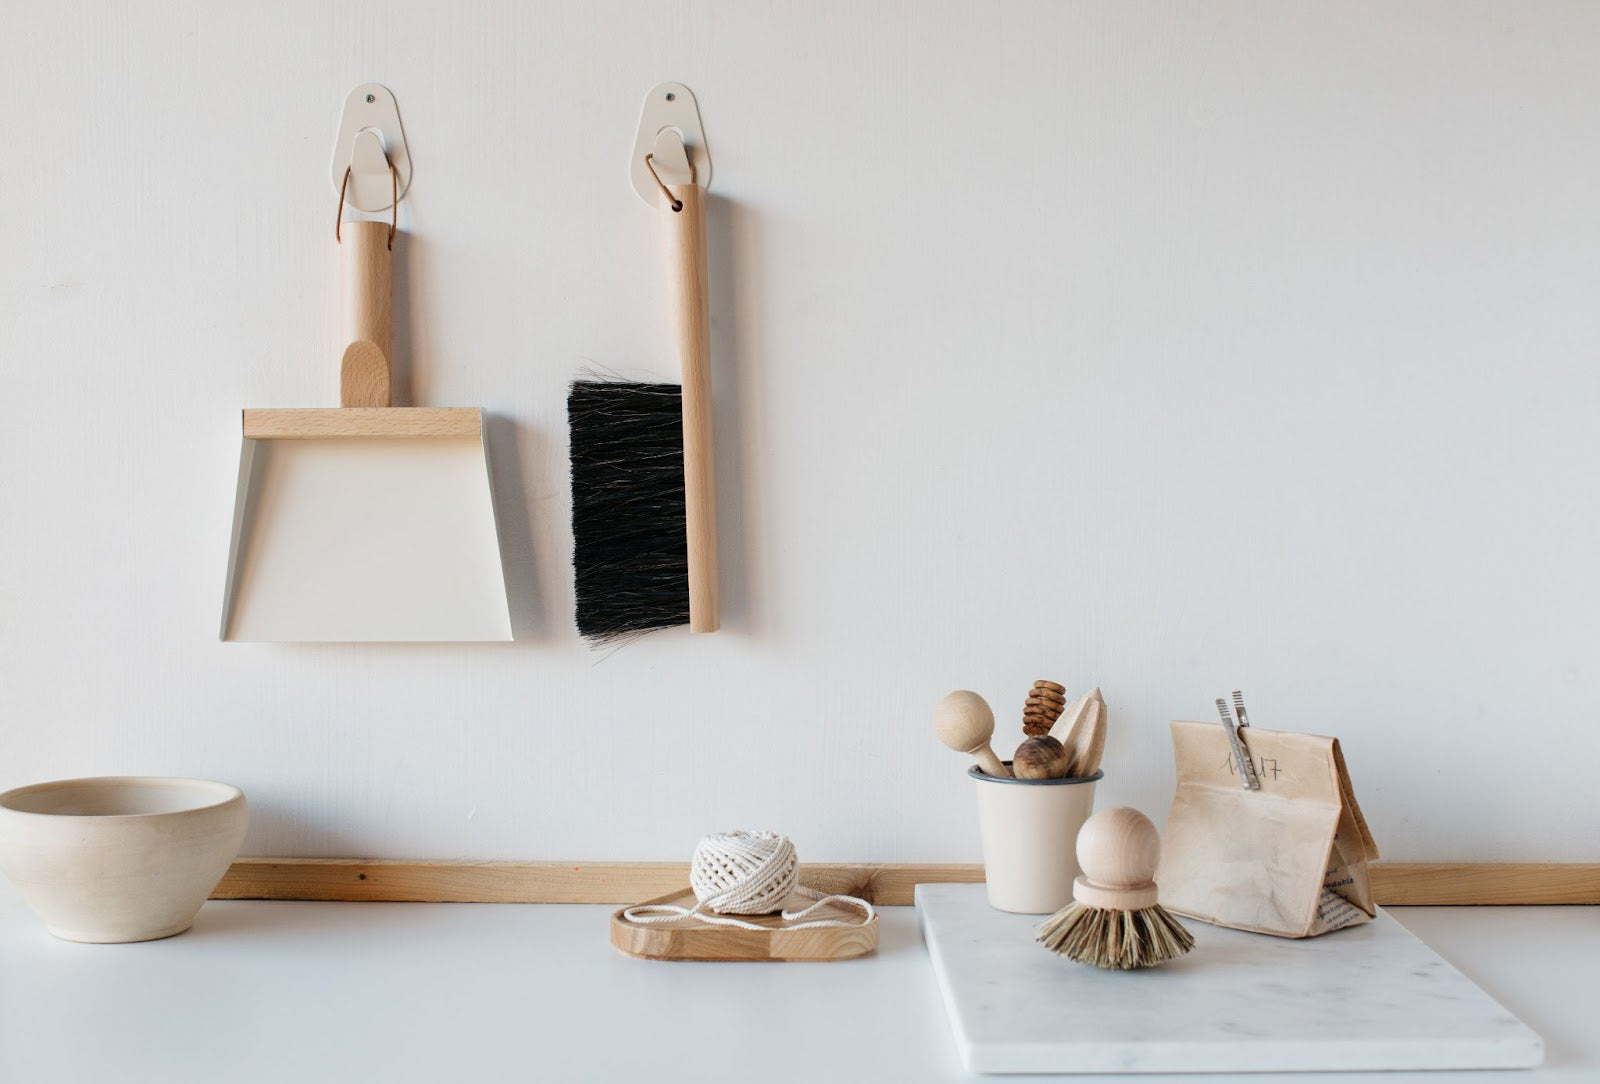 White dustpan and wooden hand broom hanging on wall above office desk.